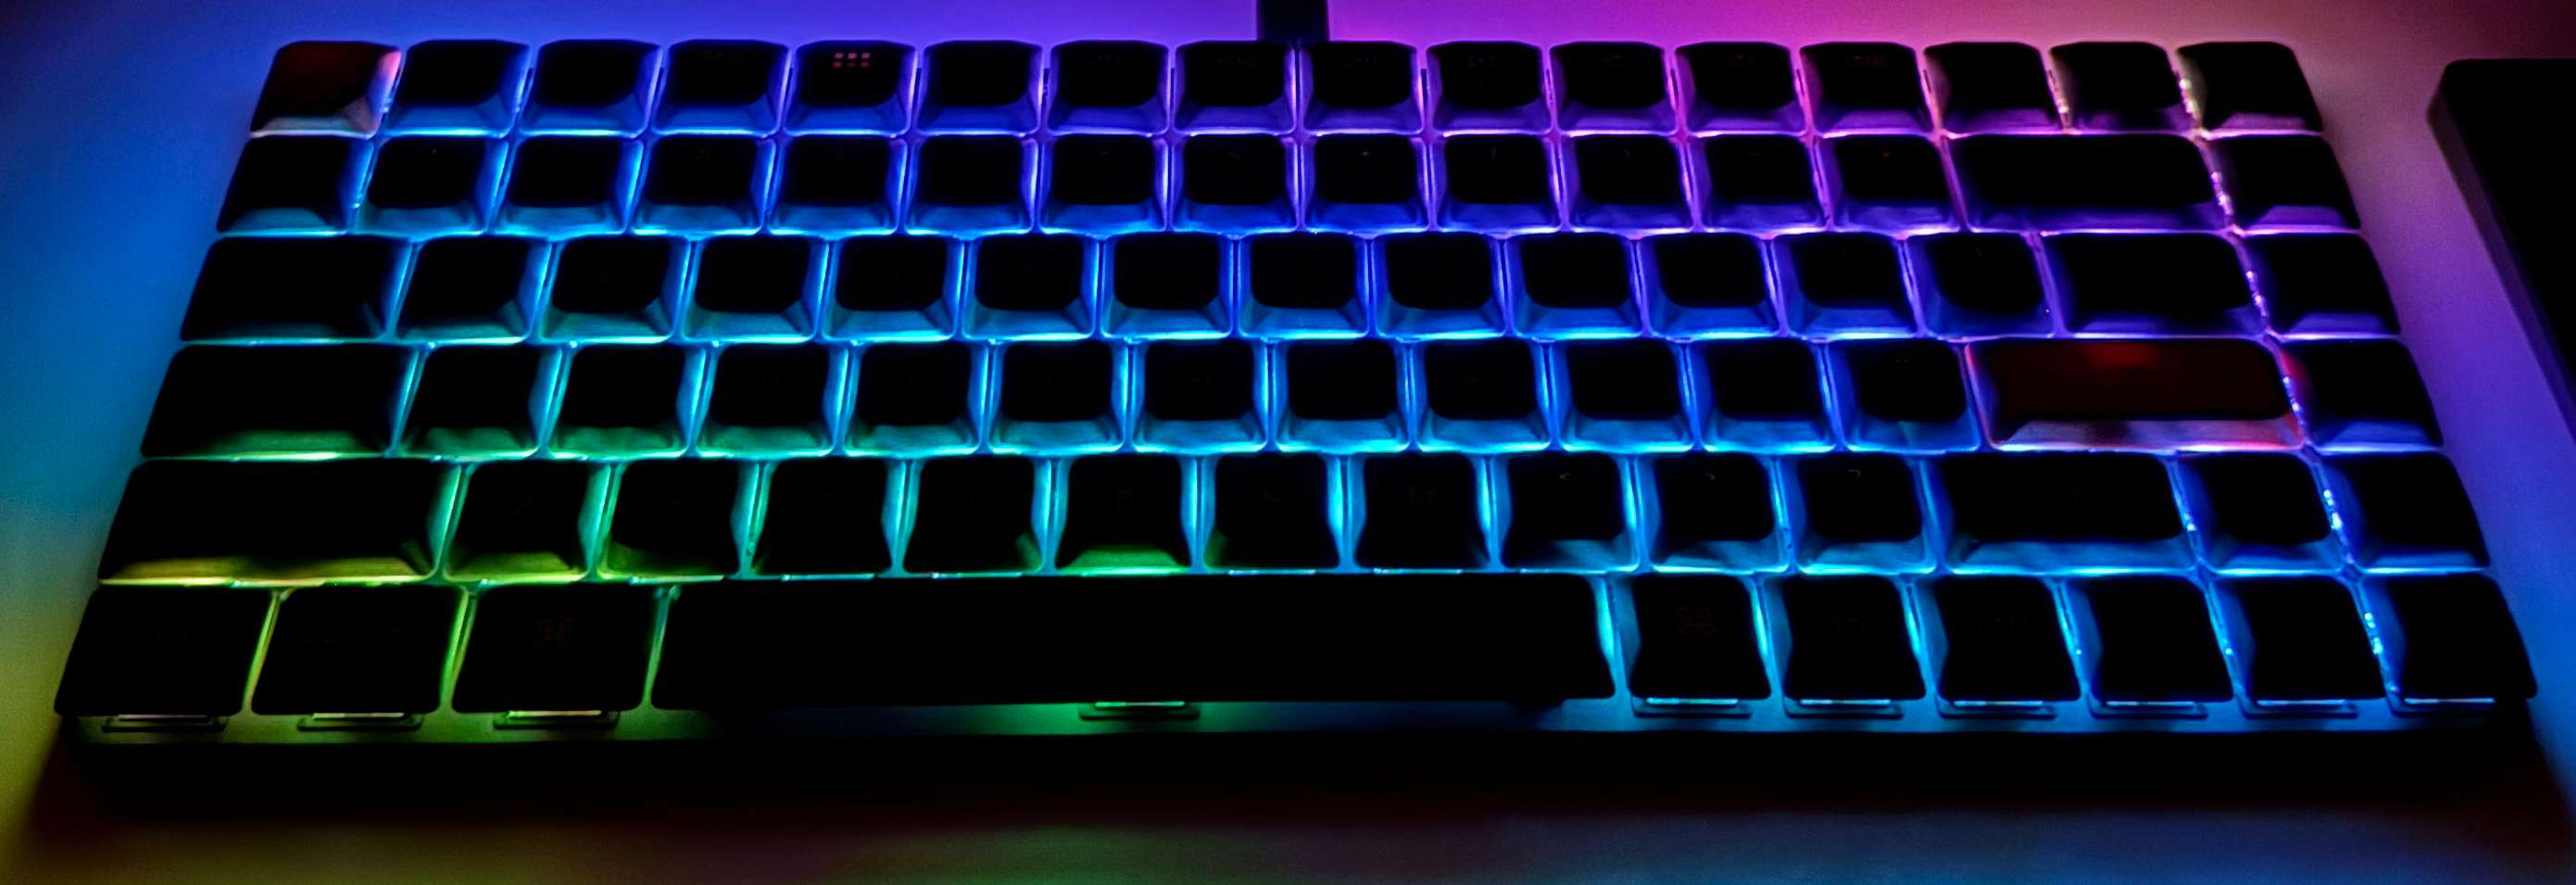 The Keychron K3 Max in the dark with
    RGB lights on